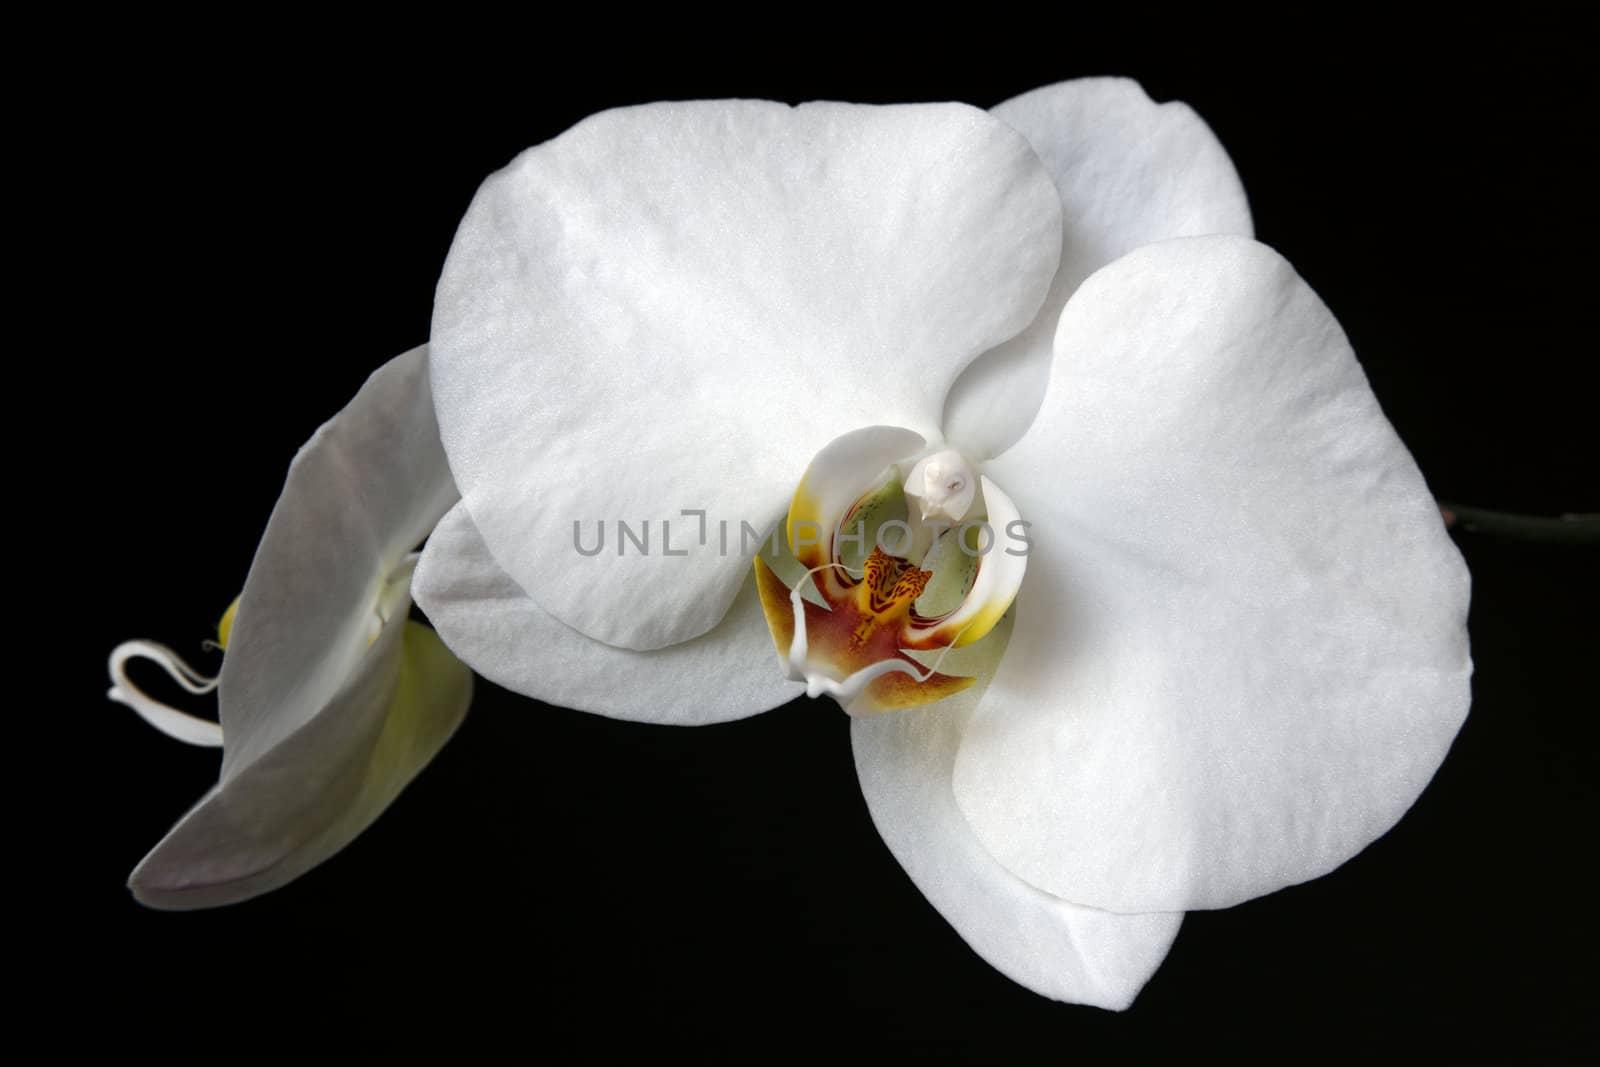 A close up studio shot of a white orchid (Doritaenopsis) on a solid black background.